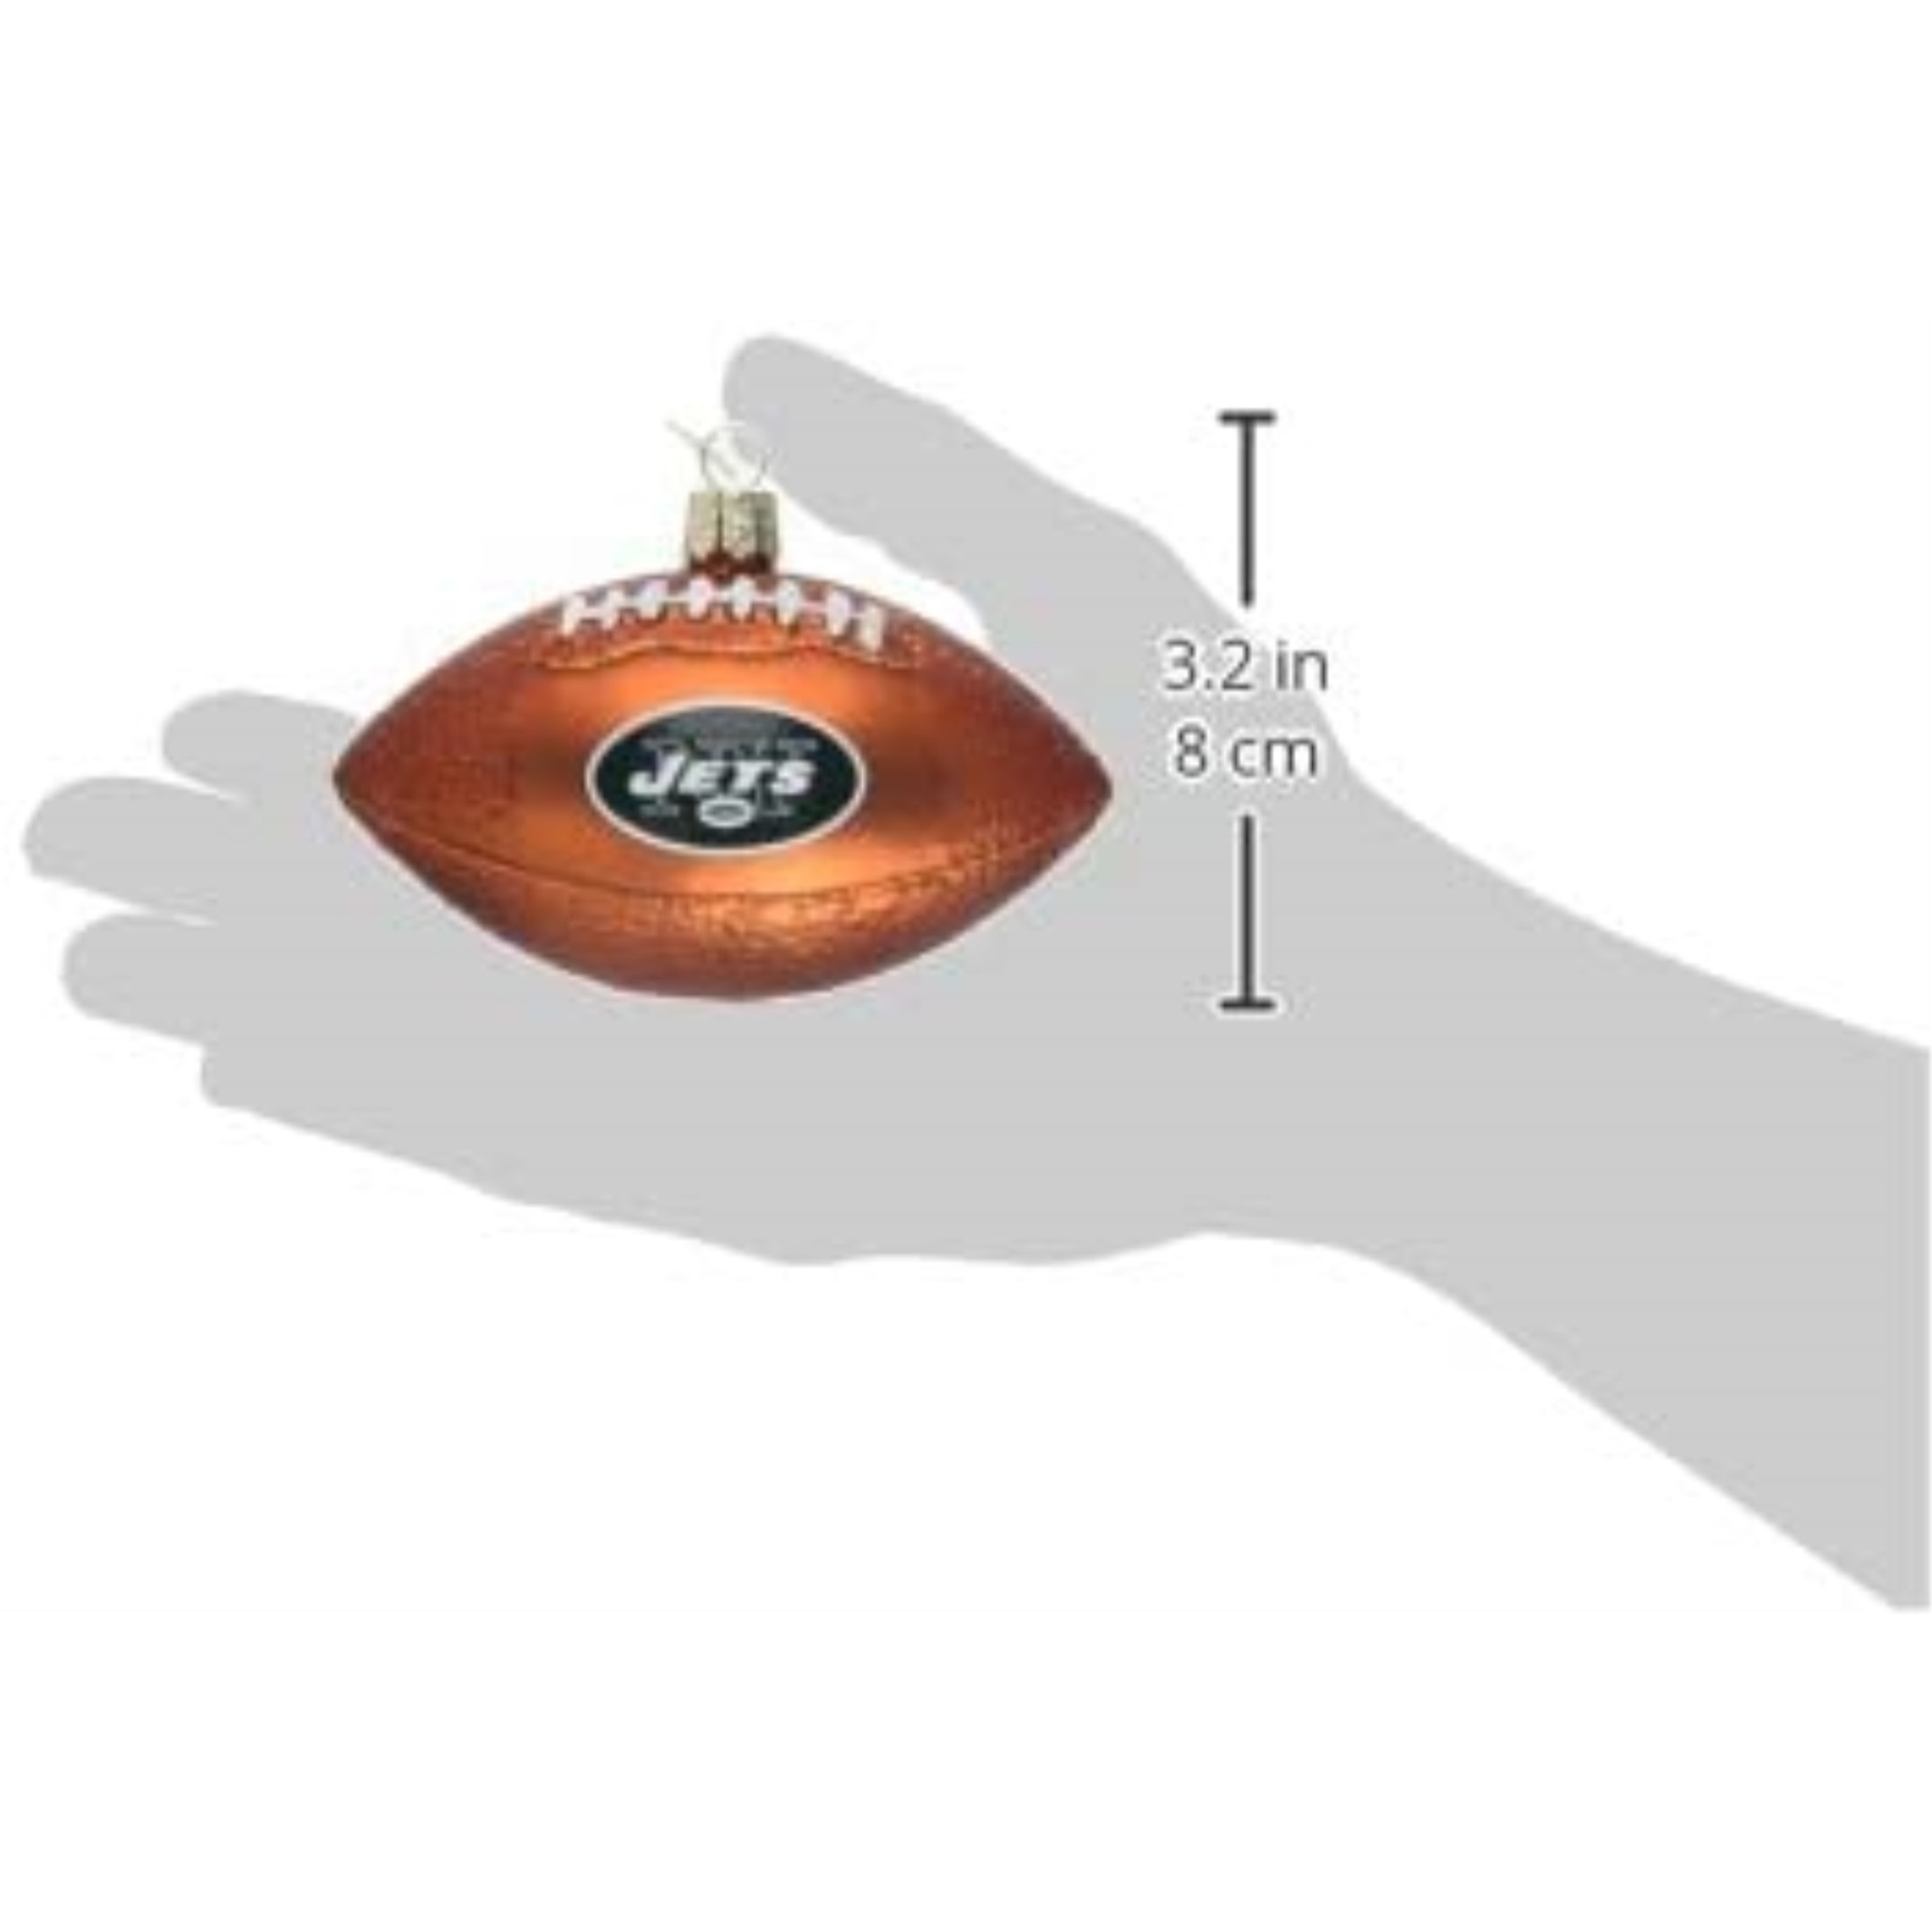 Old World Christmas Glass Blown Ornament For Christmas Tree, New York Jets Football (With OWC Gift Box)